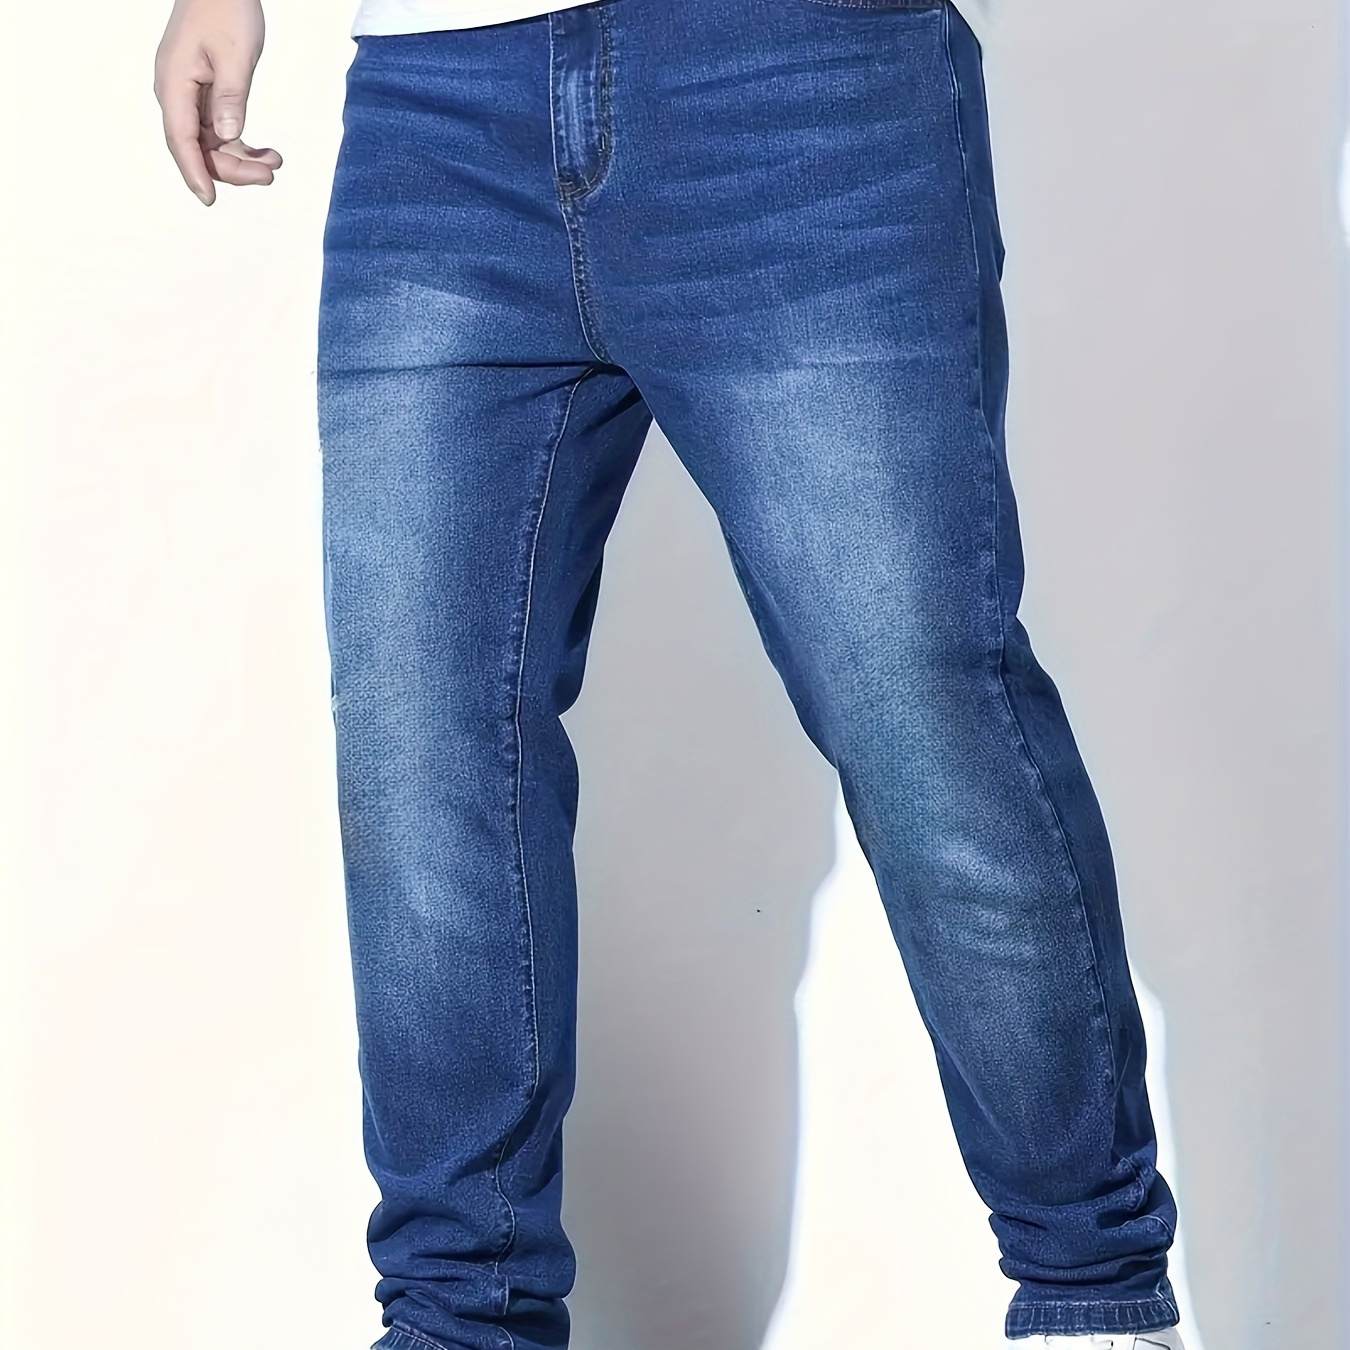 

Men's Trendy Slightly Stretch Jeans With Pockets, Casual Style Denim Pants For Daily Wear, All Seasons